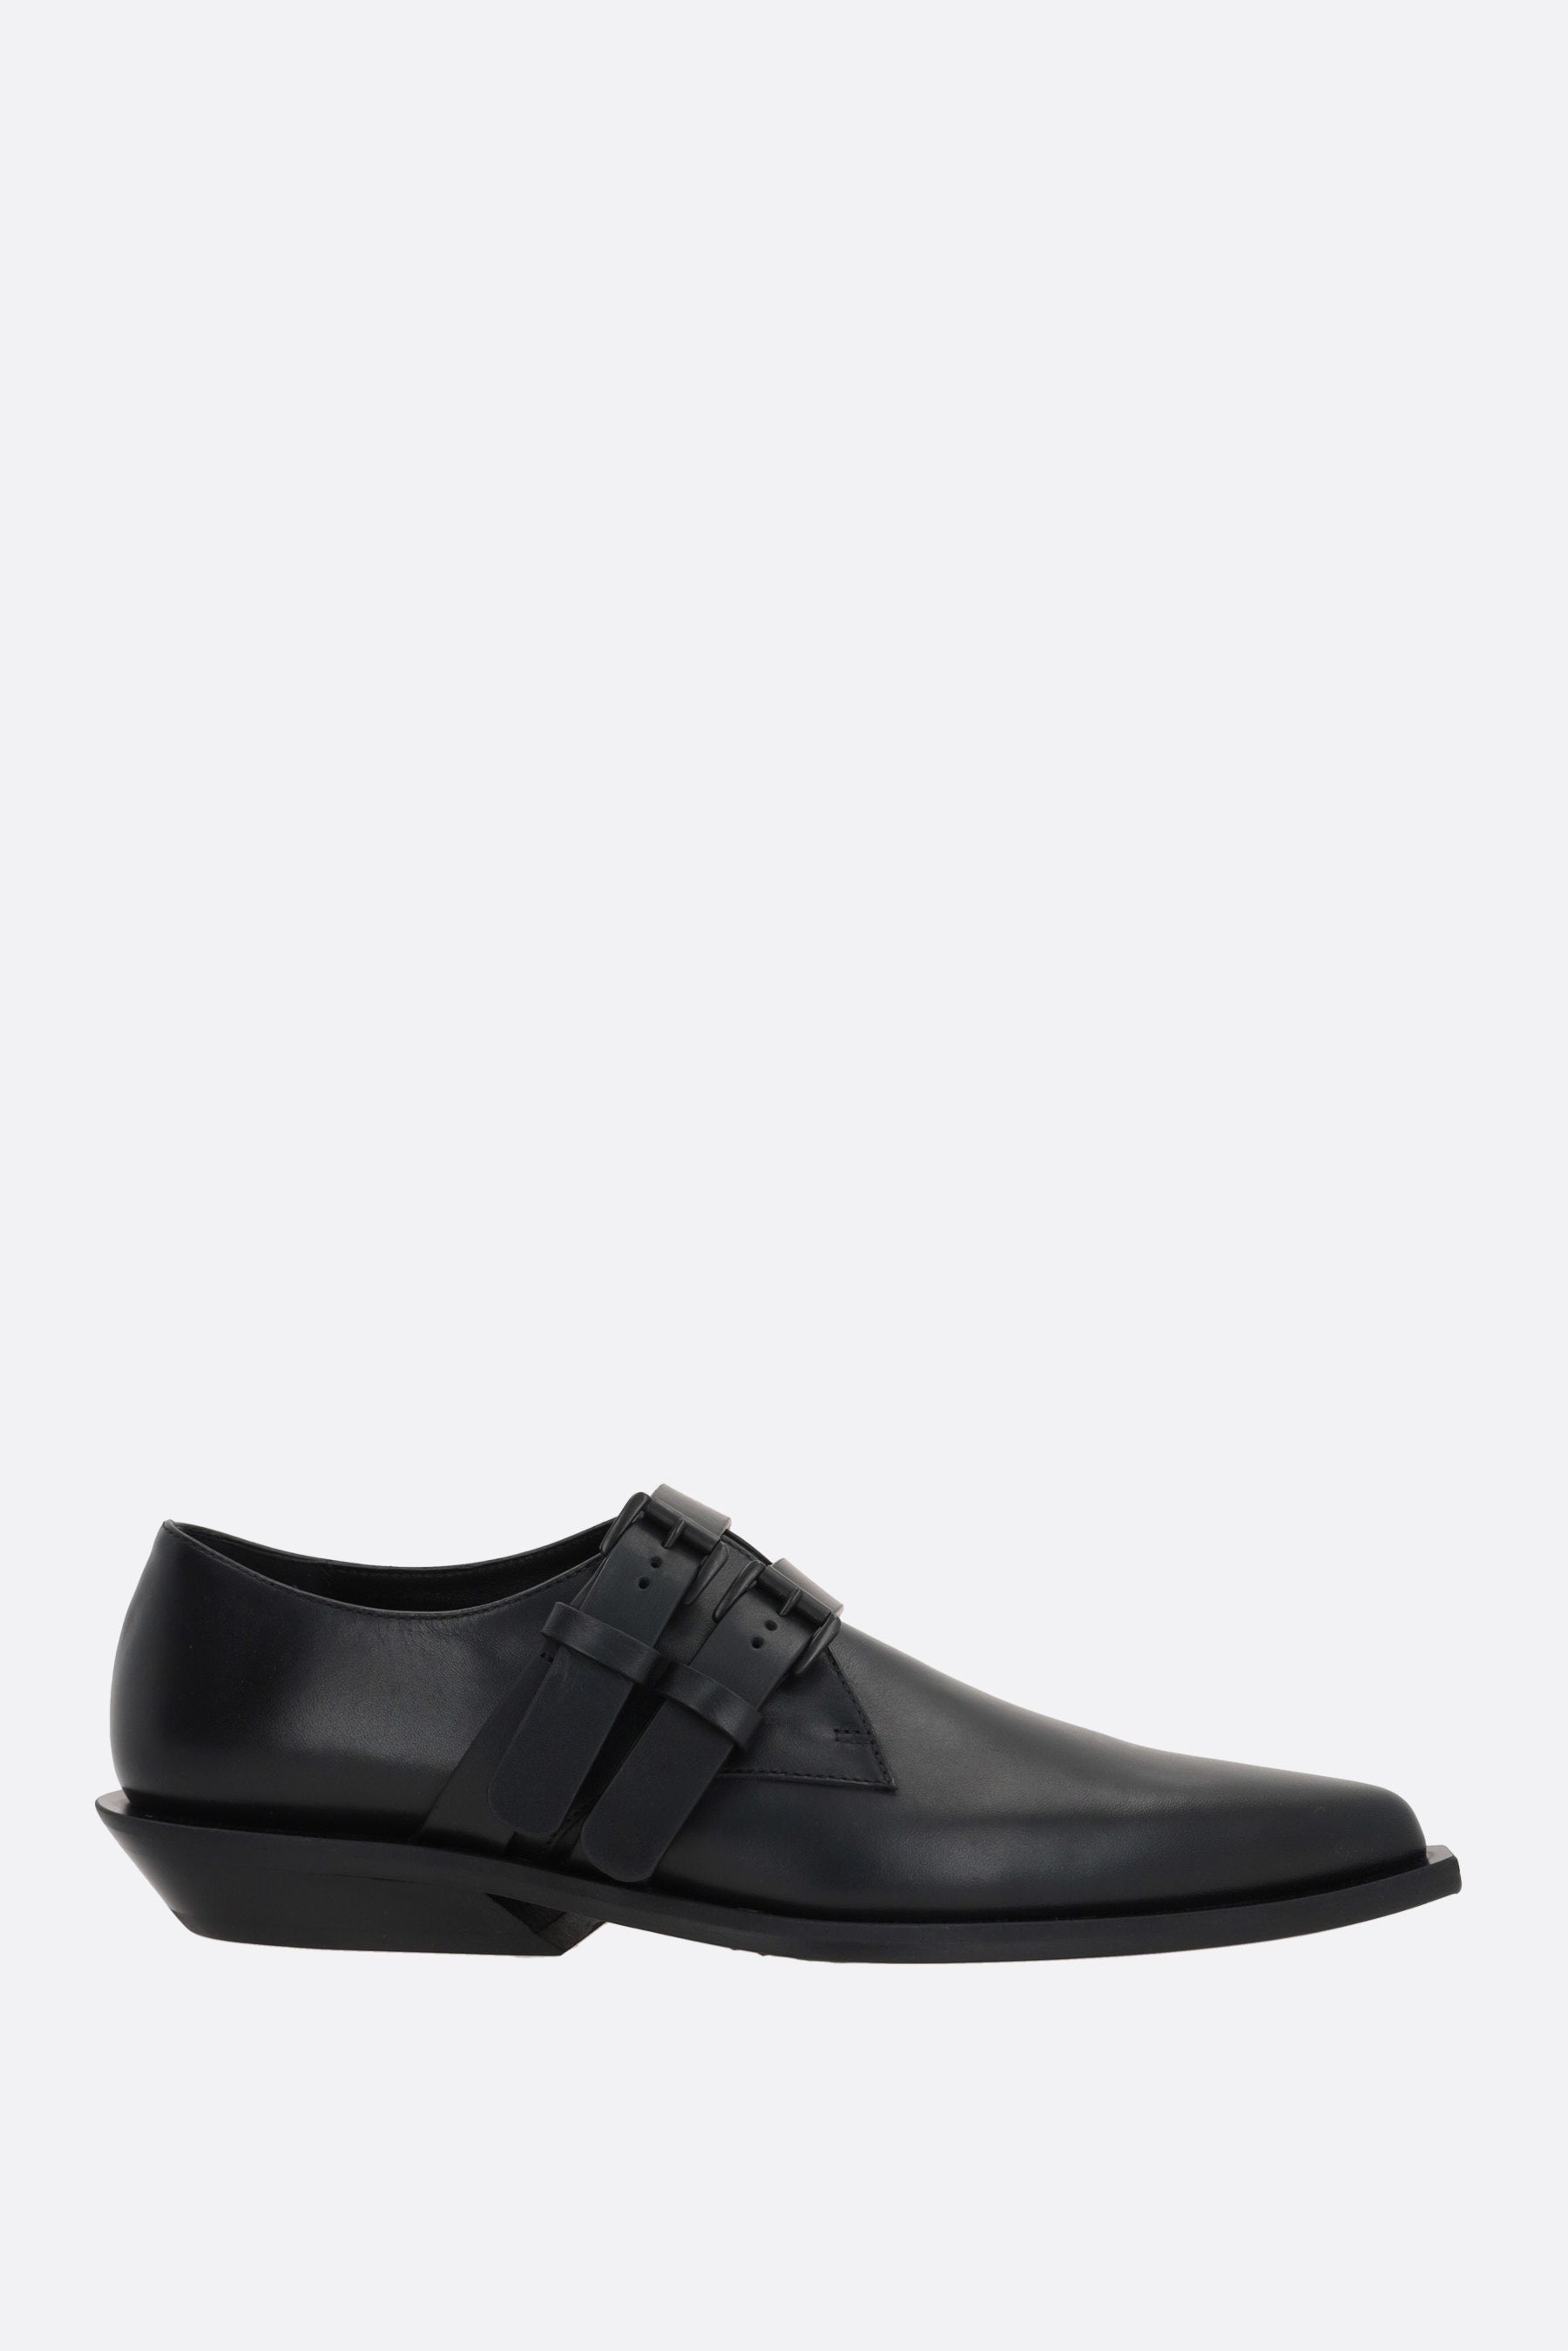 Bowie smooth leather monk strap shoes